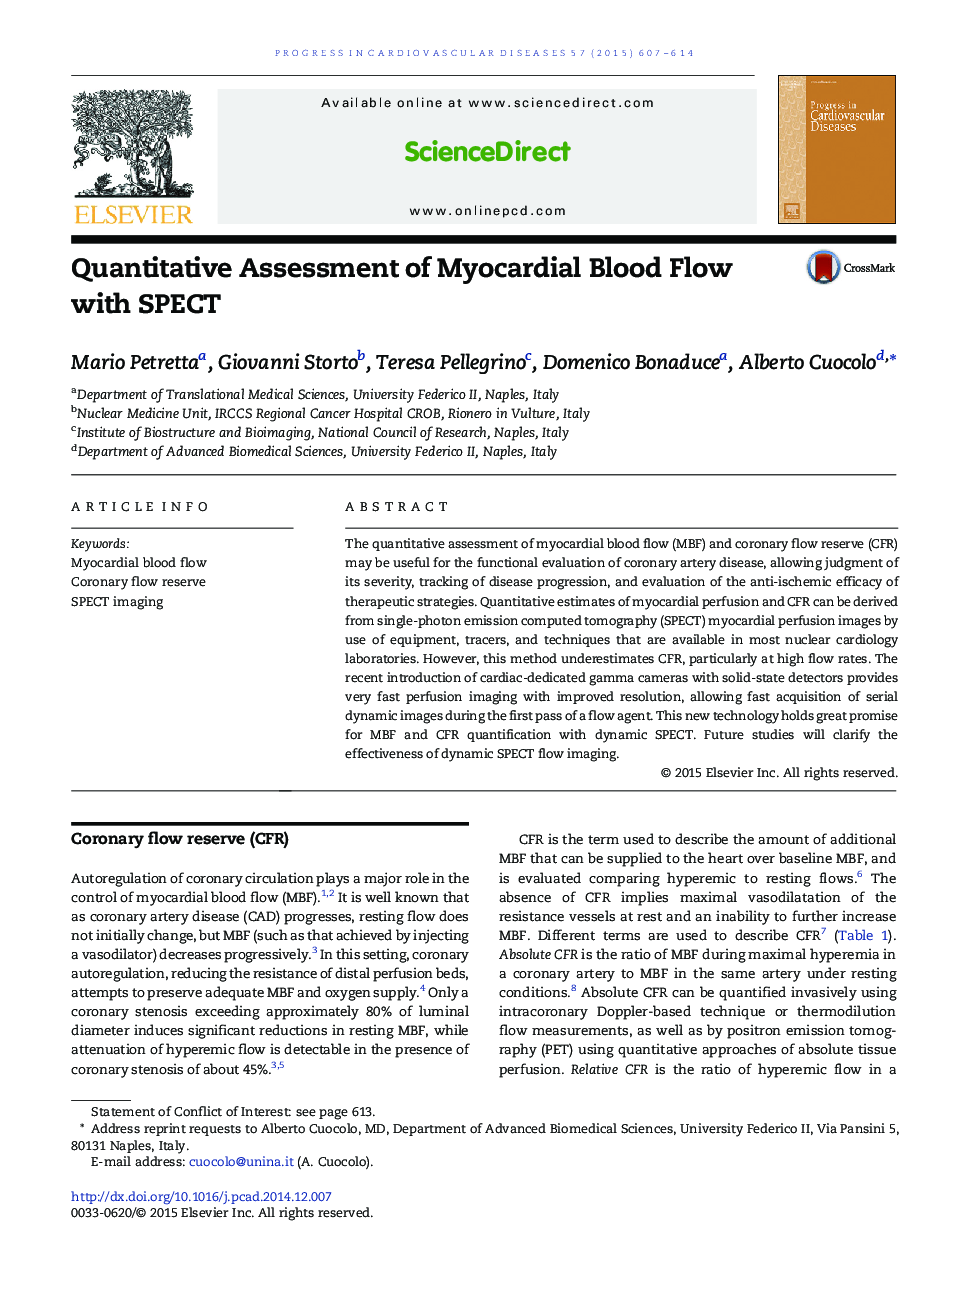 Quantitative Assessment of Myocardial Blood Flow with SPECT 